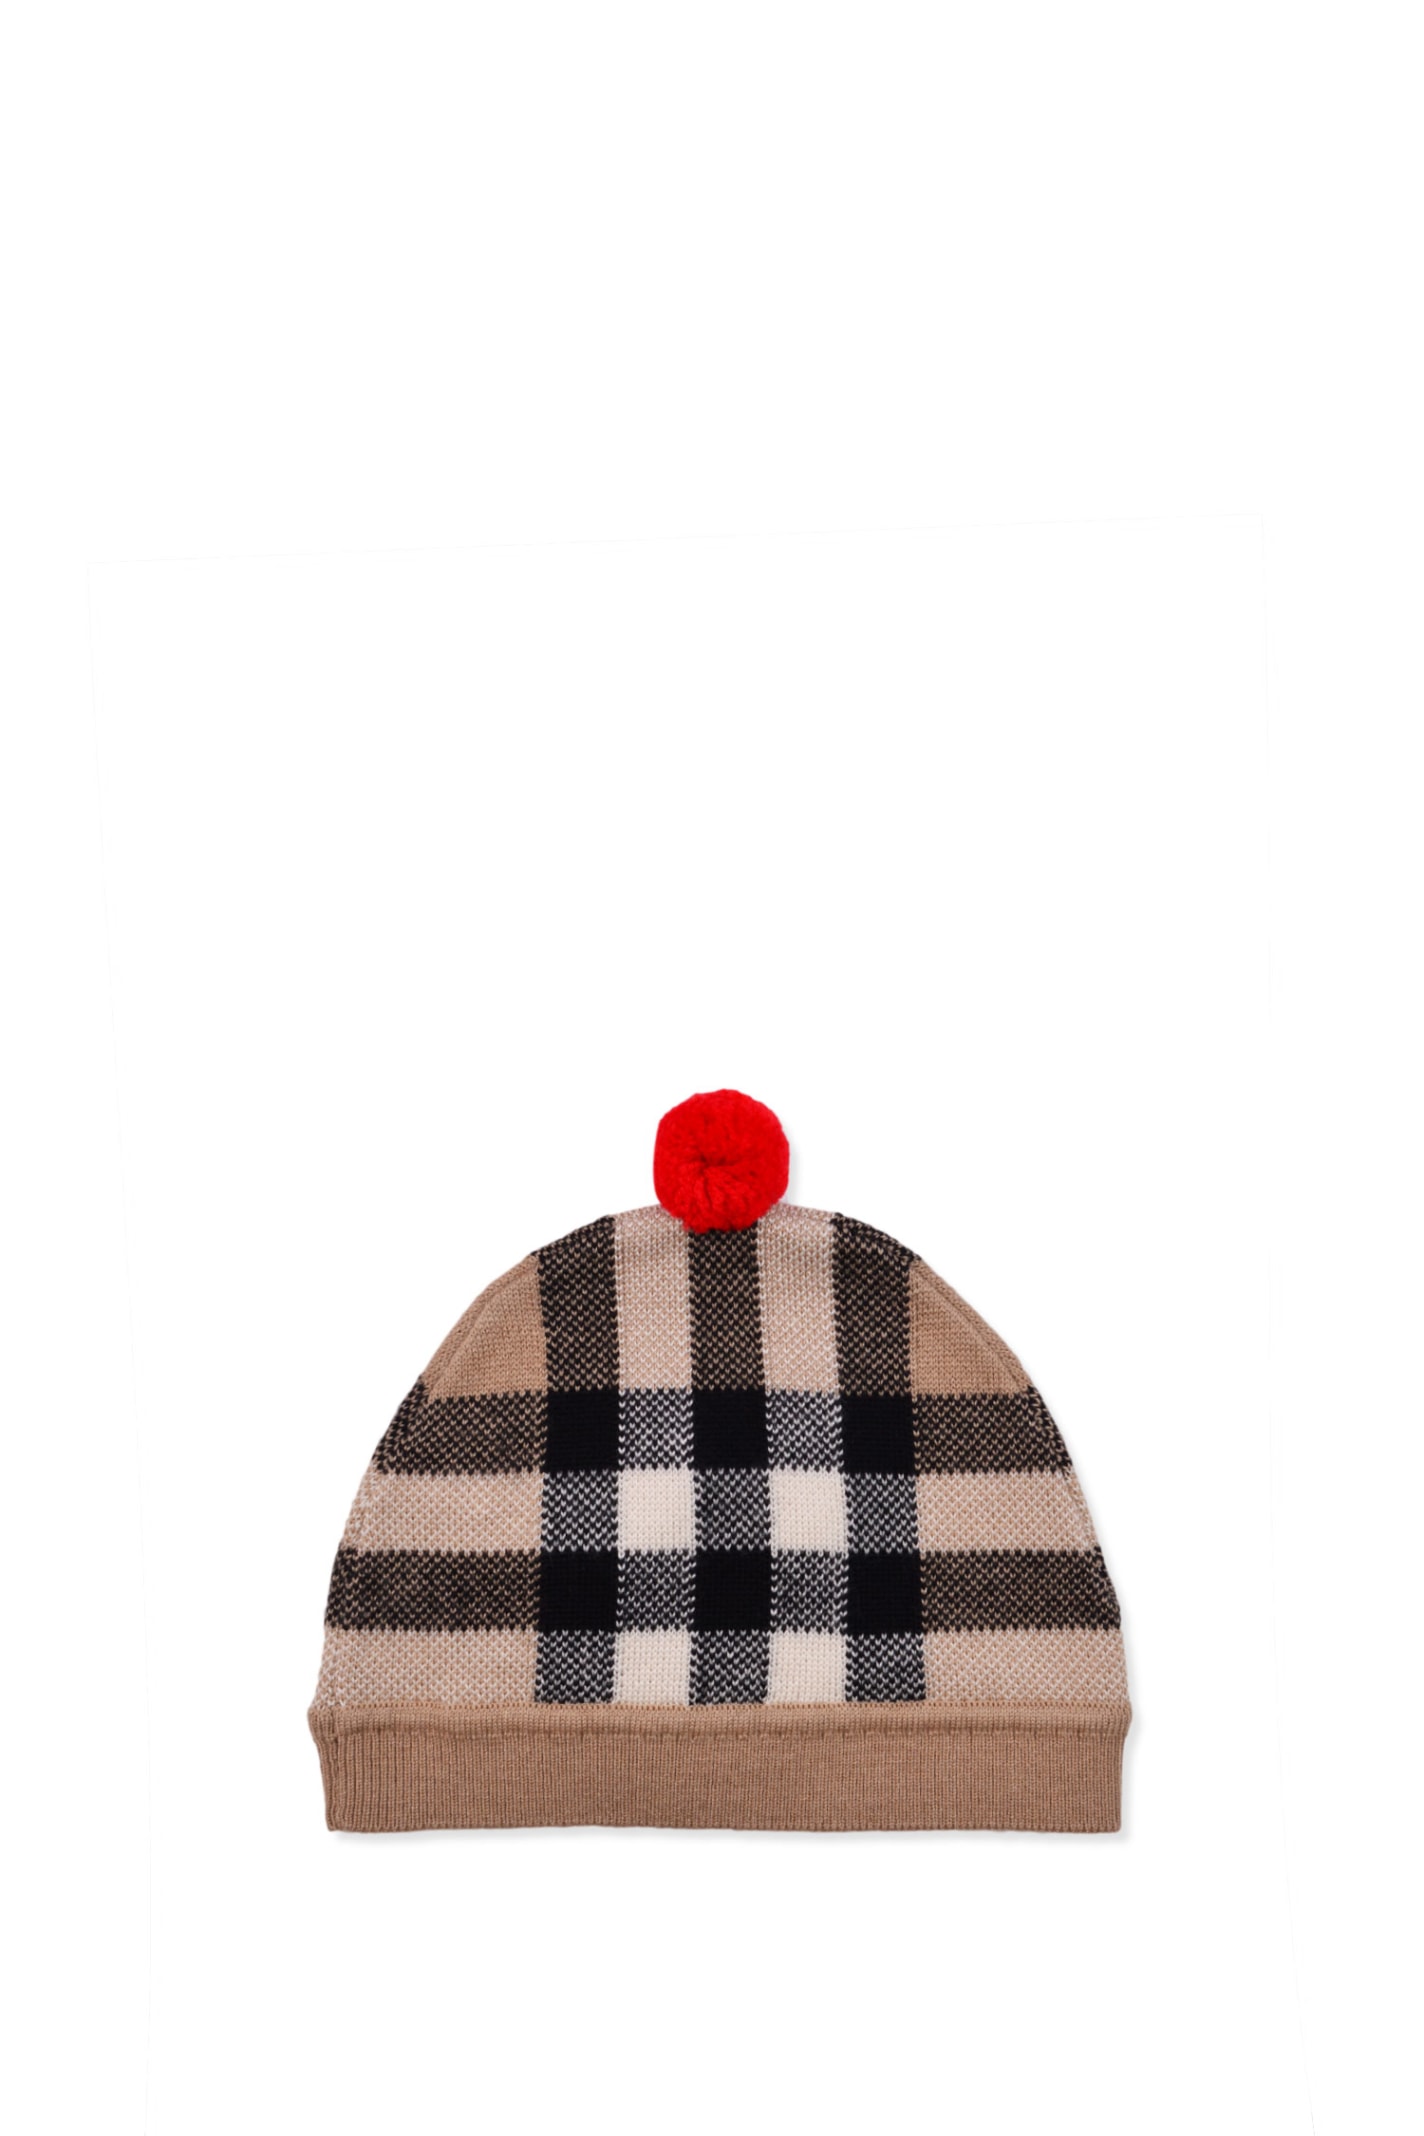 BURBERRY CHECK PATTERN HAT